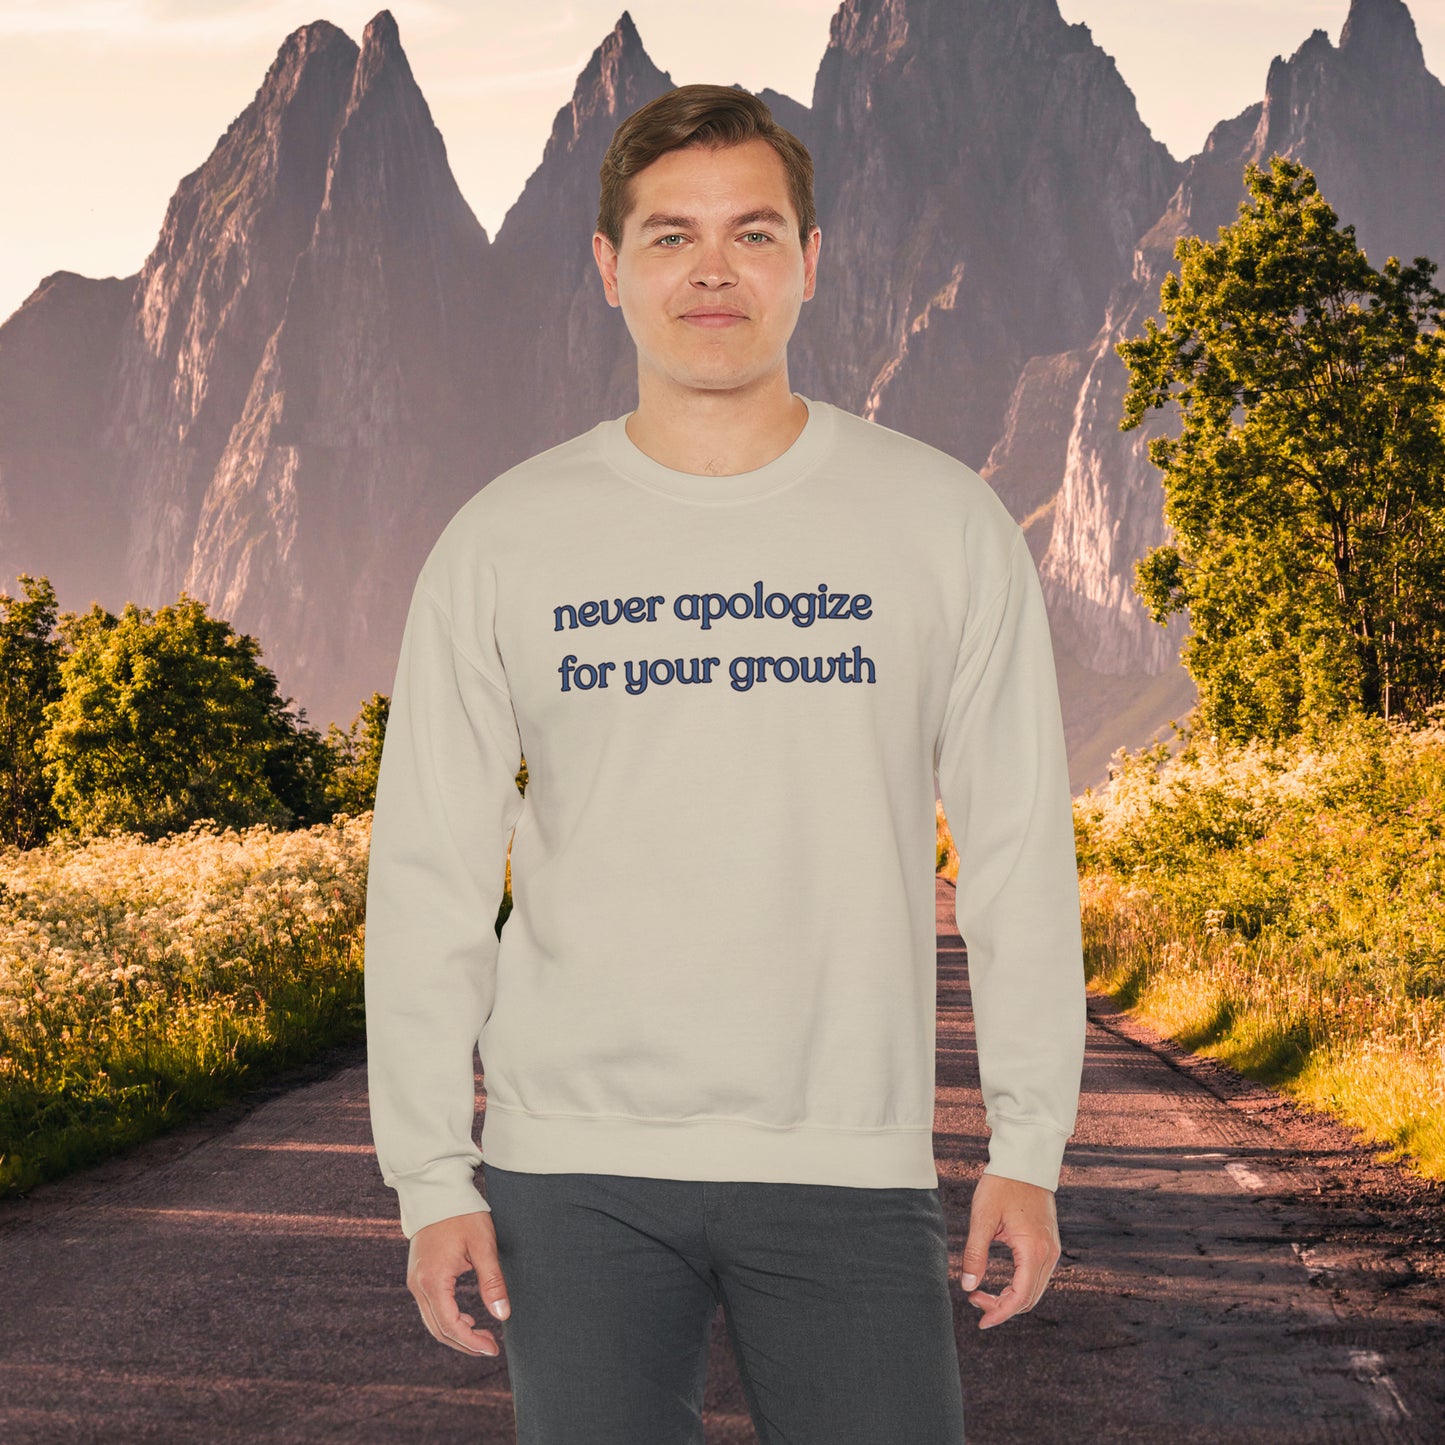 A sage message of “never apologize for your growth”. Give the gift of this Unisex Heavy Blend™ Crewneck Sweatshirt or get one for yourself.